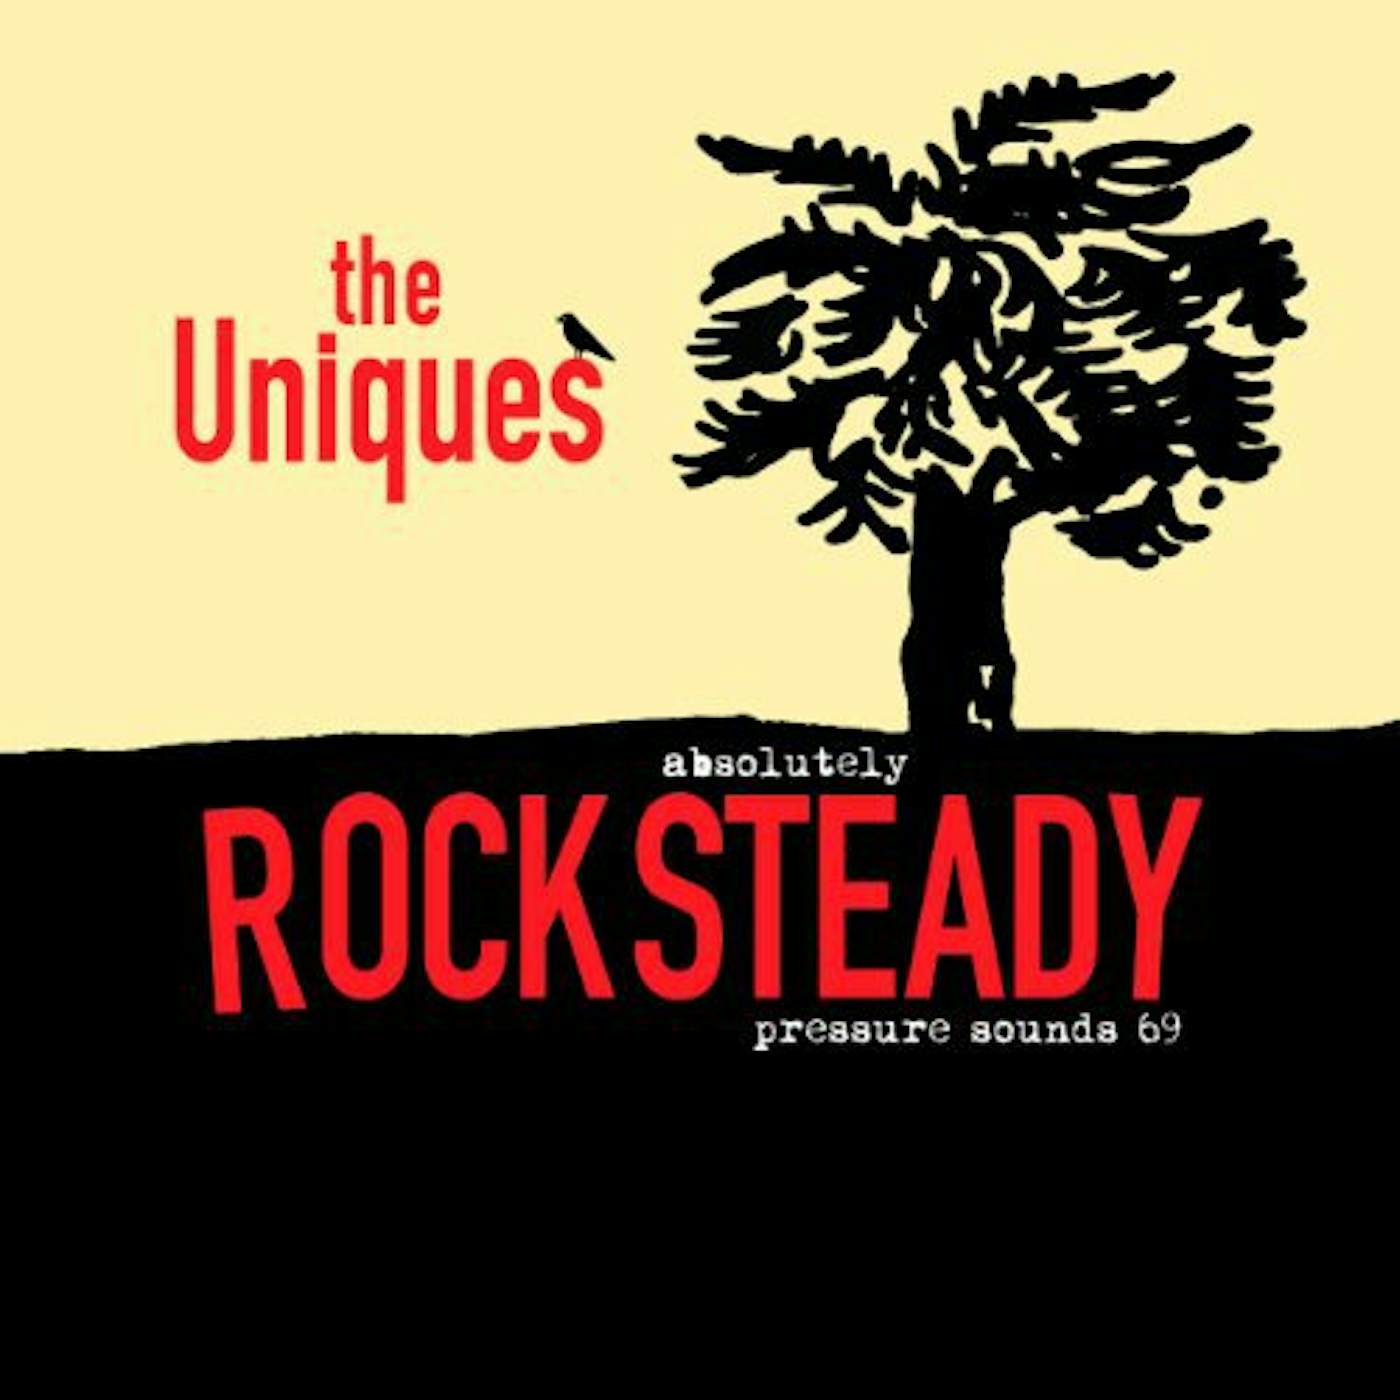 Uniques Absolutely Rocksteady Vinyl Record